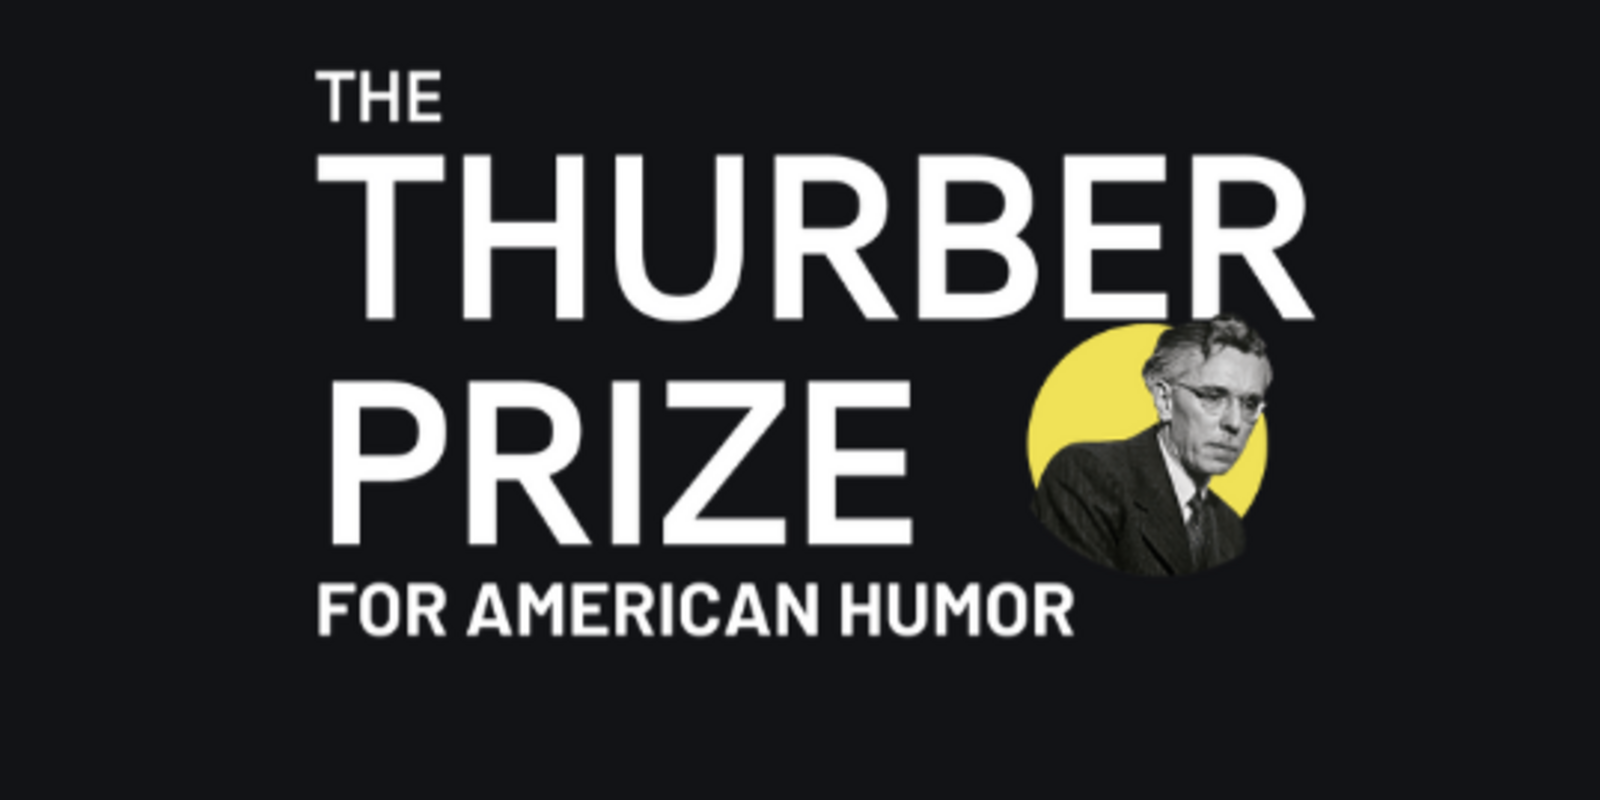 The 23rd Thurber Prize for American Humor